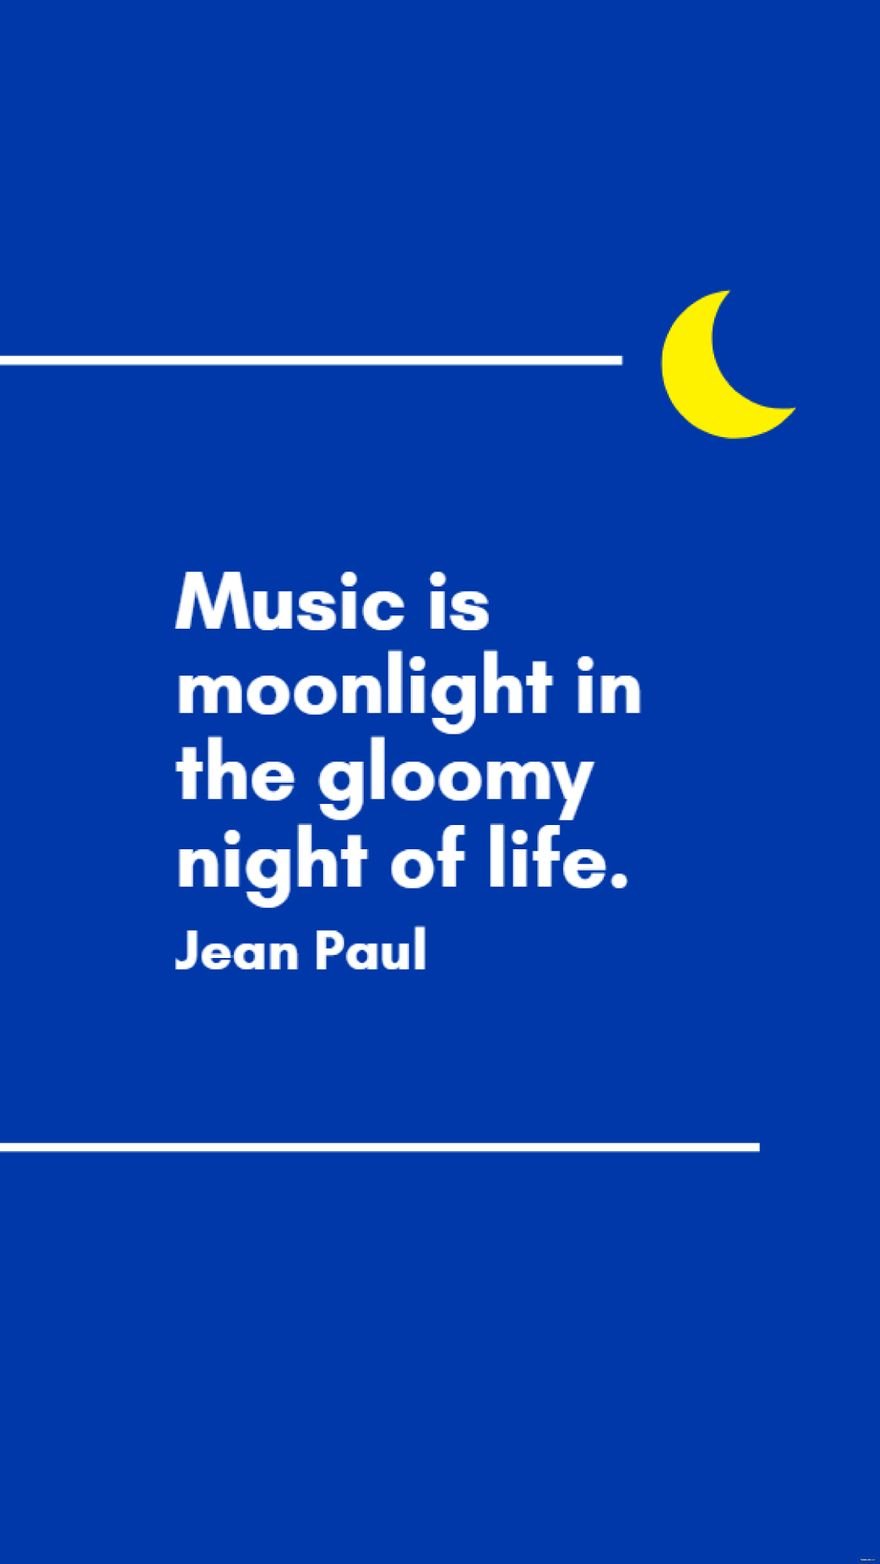 Jean Paul - Music is moonlight in the gloomy night of life.